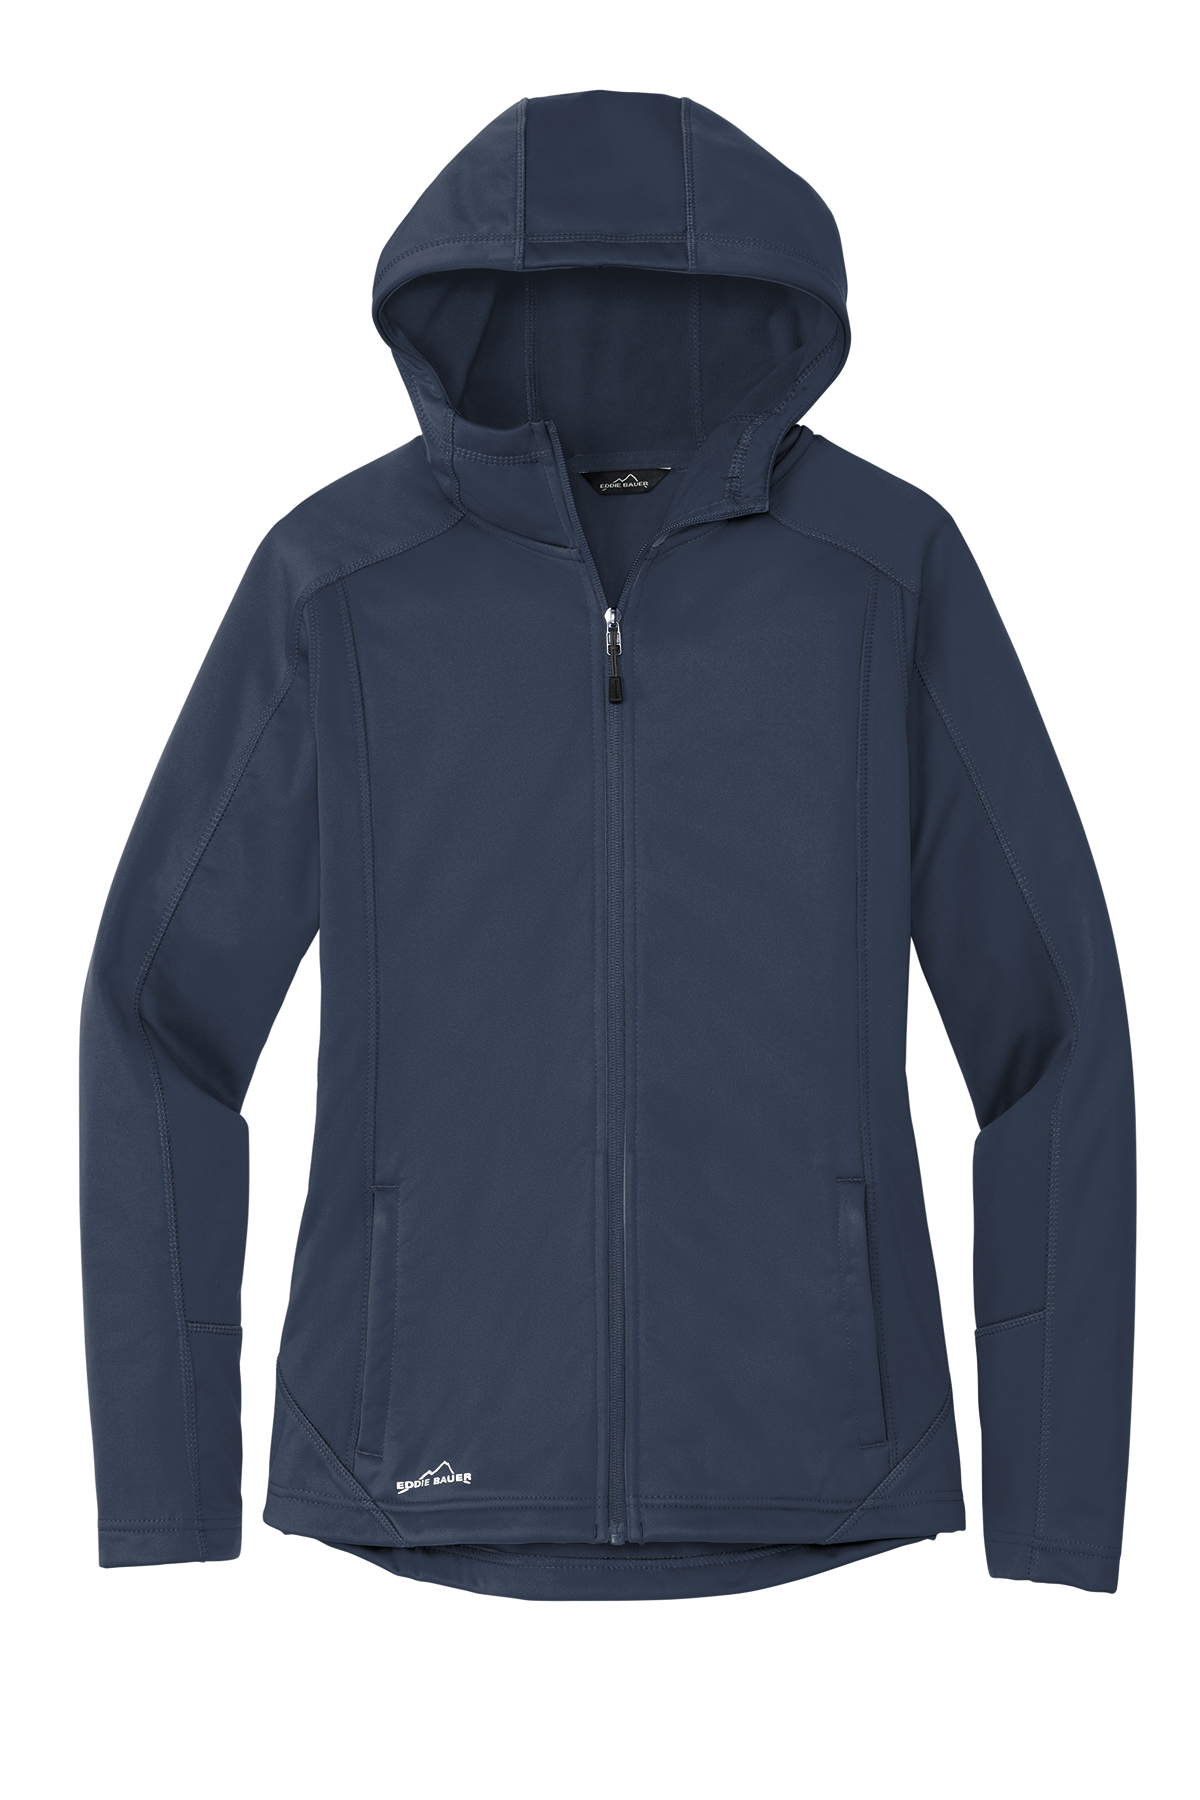 Eddie Bauer Ladies Trail Soft Shell Jacket | Product | Company Casuals